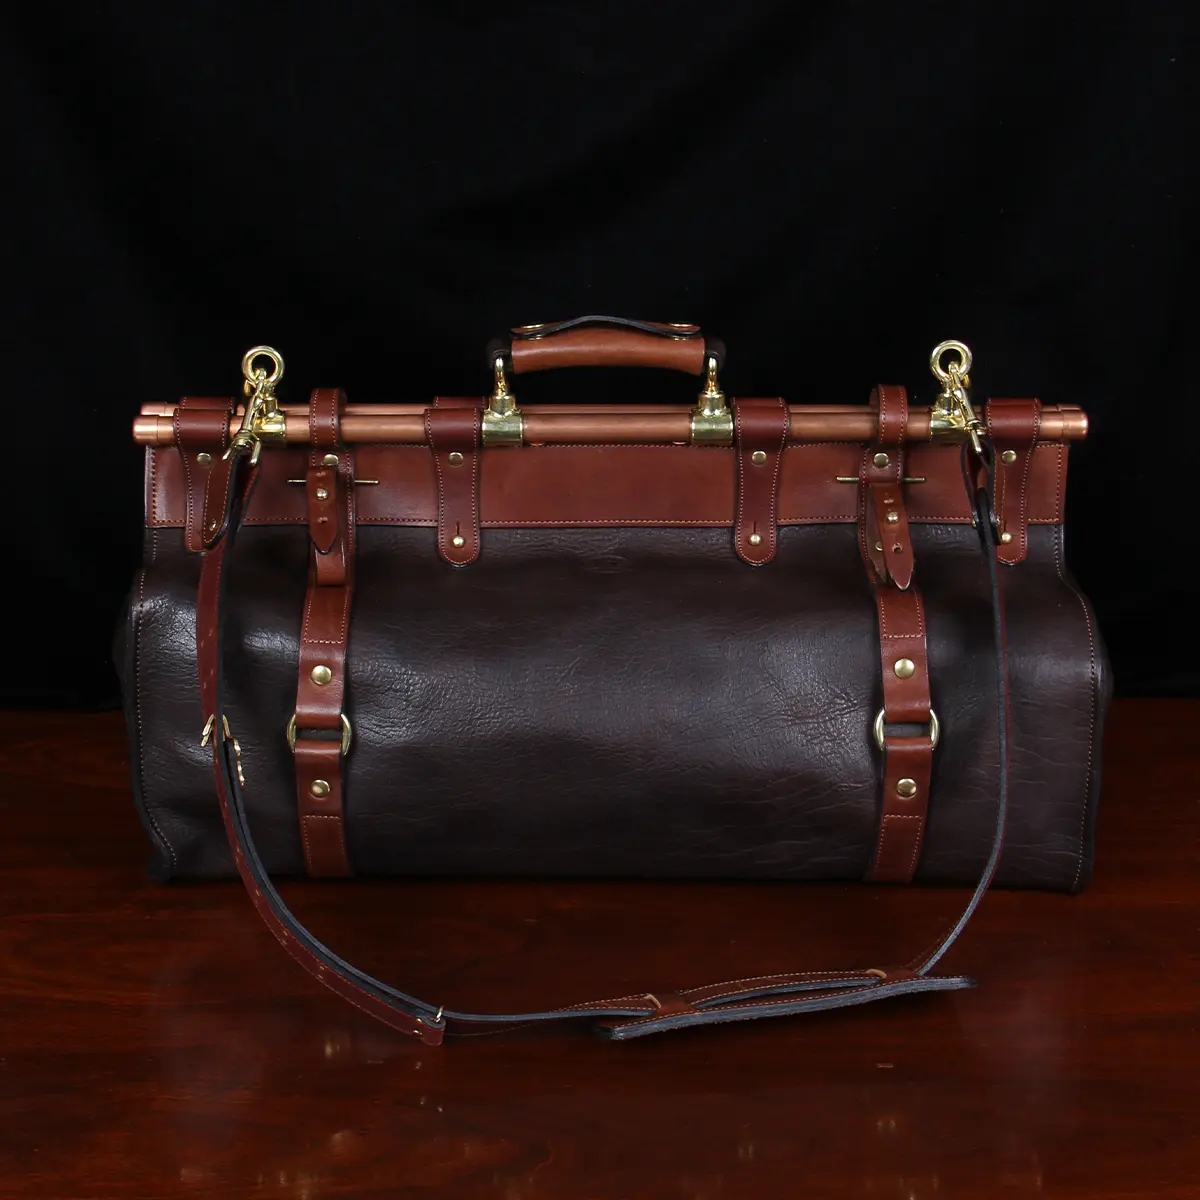 Back view of Dark brown buffalo leather No. 3 grip travel bag sitting on table